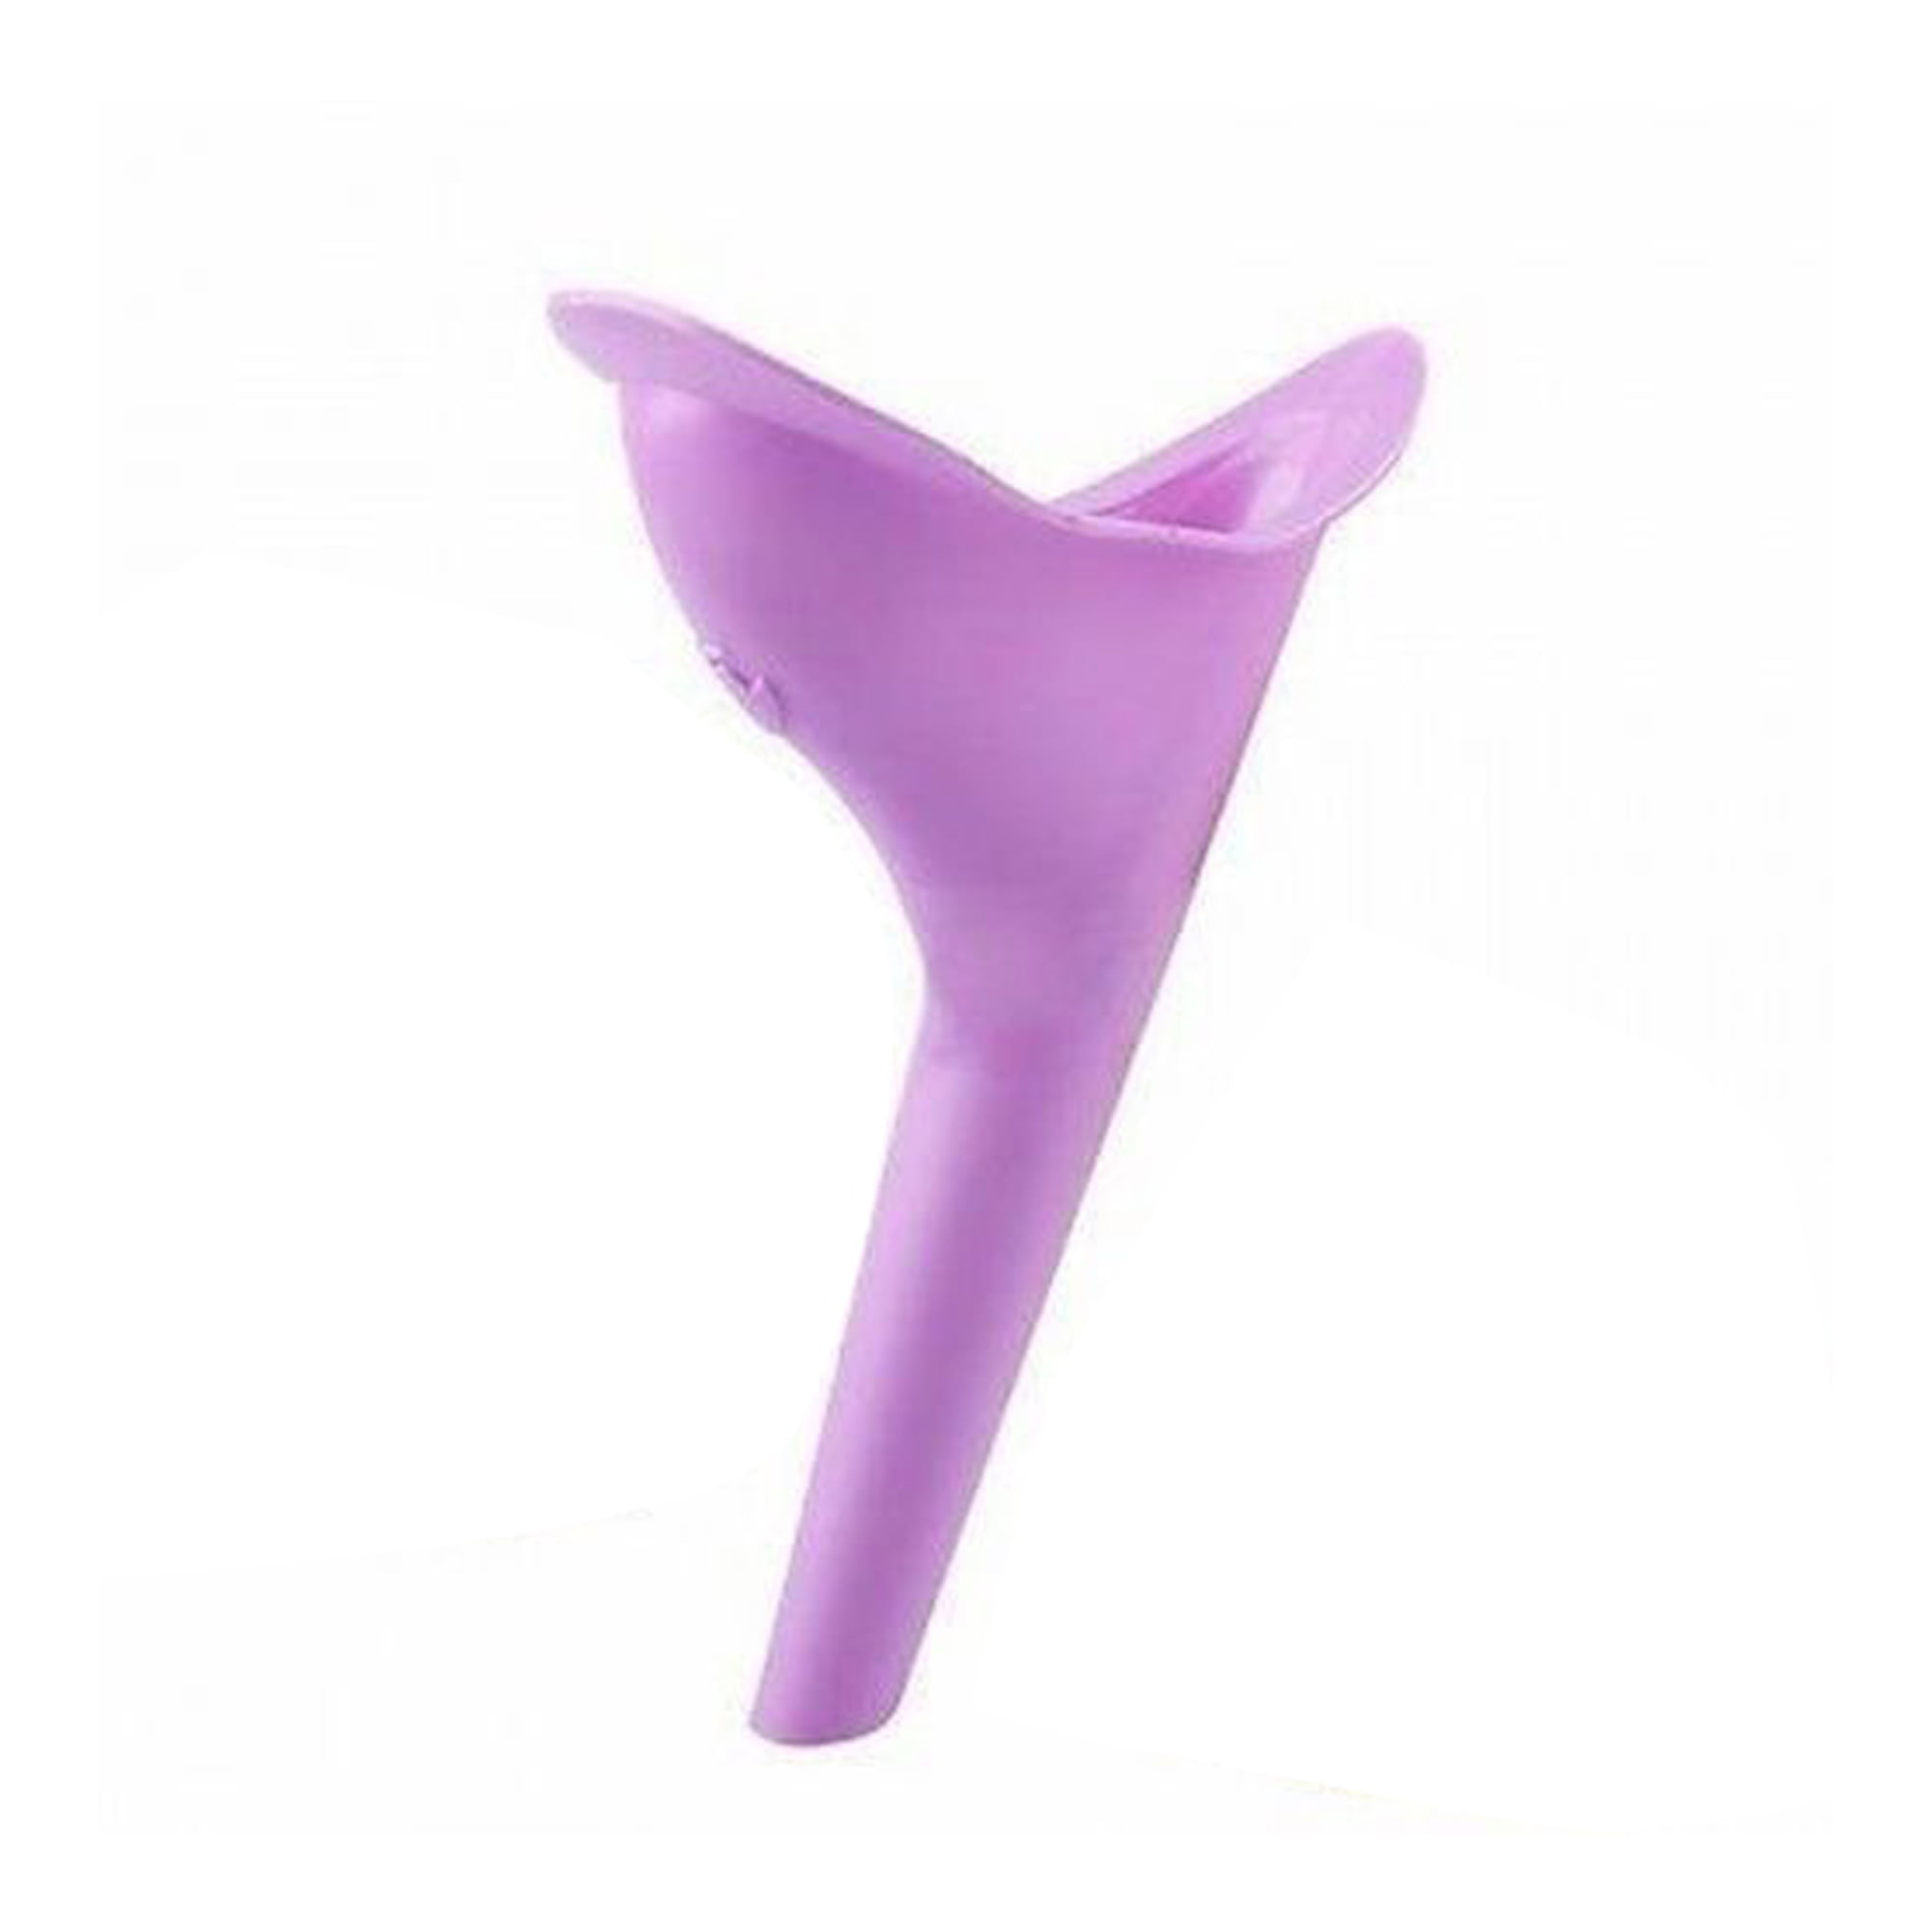 1/2Pcs Fashions Woman Lady Female Urinal Funnel Urinal Camping Portable Travel 